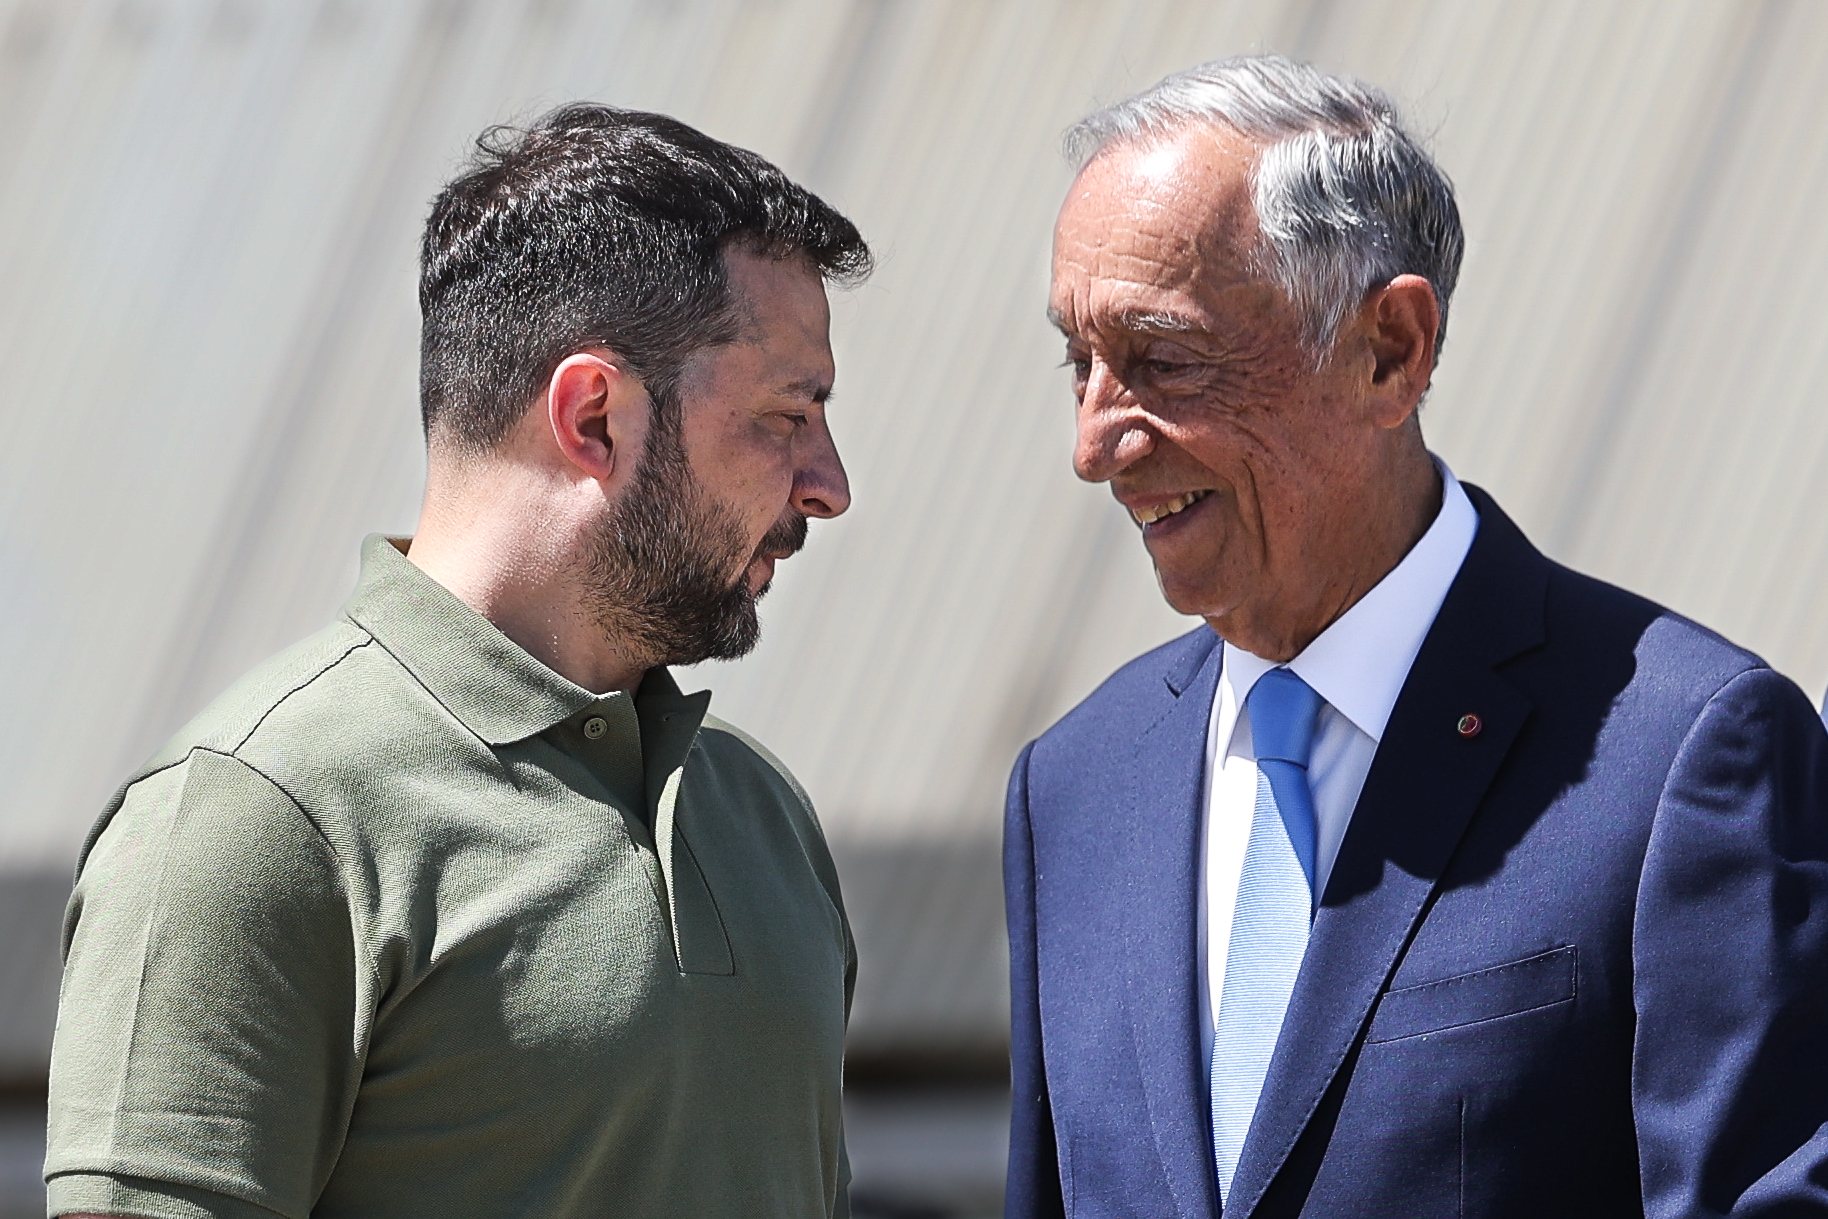 Portuguese head of state Marcelo Rebelo de Sousa (R) welcome Ukraine&#039;s President Volodymyr Zelensky (L) on his arrival at Figo Maduro air base, in Lisbon, Portugal, 28 May 2024. According to this note, released simultaneously by the office of the prime minister, Luís Montenegro, &quot;President Zelensky&#039;s working visit is part of the shared intention to deepen the excellent relations between the two states, with a particular focus on strengthening cooperation in the field of security and defence&quot;. TIAGO PETINGA/LUSA/POOL